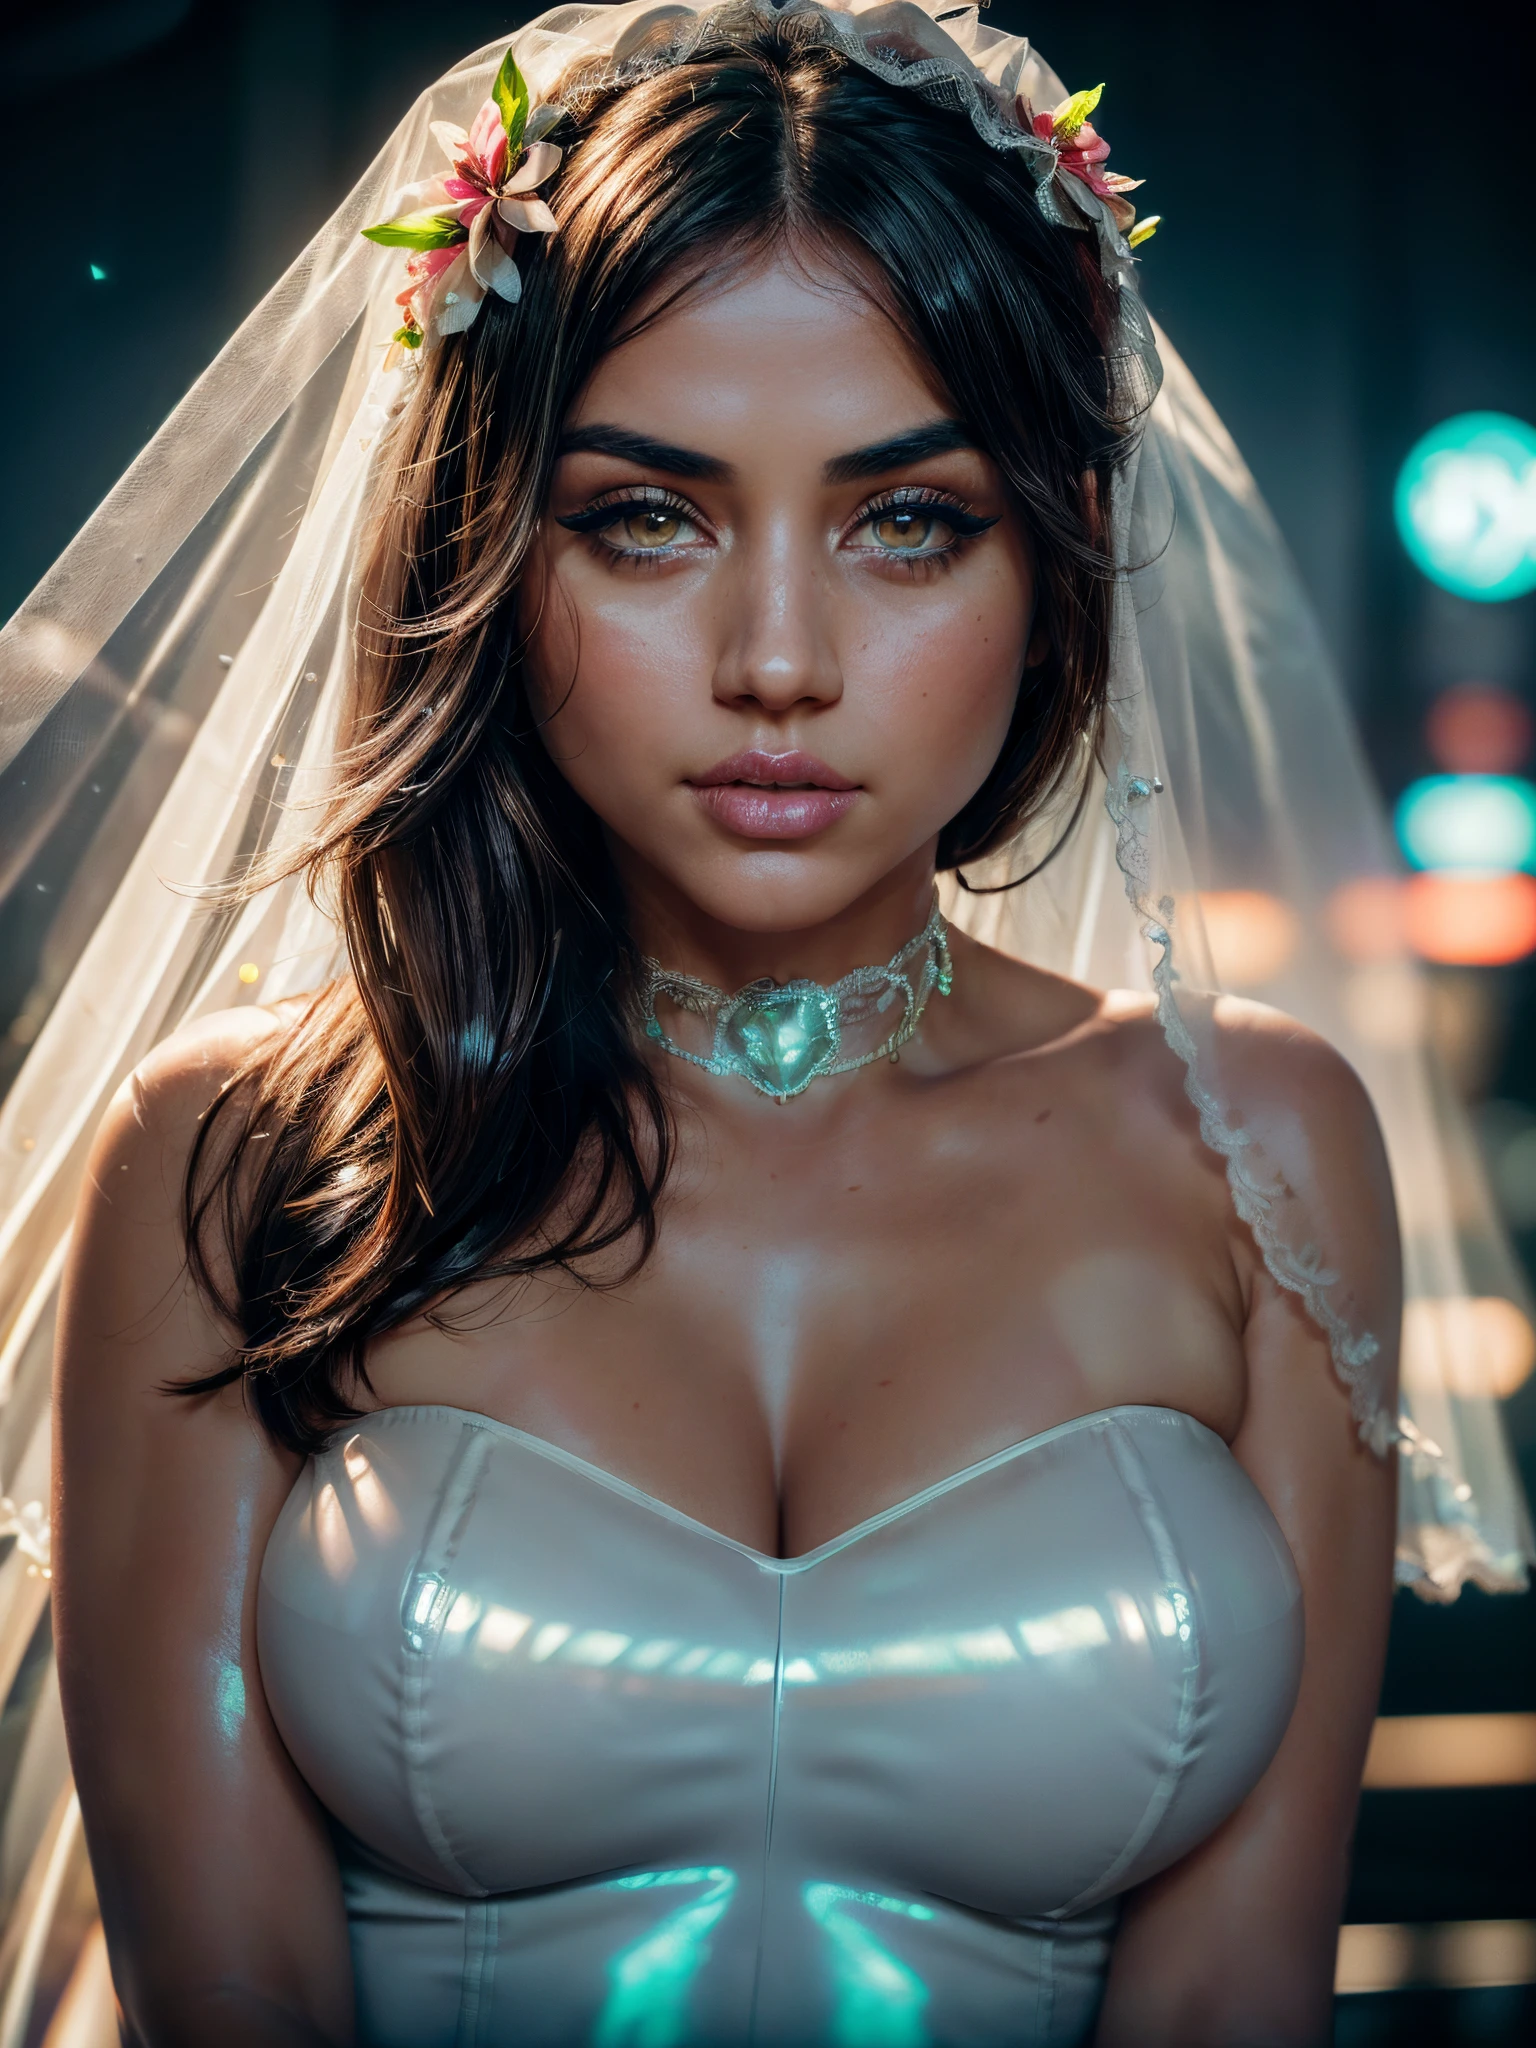 (ultra realistic,32k,RAW photo:1.1),(high detailed skin:1.1), 8k uhd, dslr, high quality, film grain, (makeup, mascara:1.1), lips,(thick\lips\), (shiny glossy translucent clothing:1.1), flower, veil, bride, white dress,hair flower, bridal veil, bare shoulders, strapless, detached collar, feather trim, Posing as if whispering a secret, (busty:1.1) , (chubby:0.1),(soft shaded neon light:1.2), dark theme, sunrise, vibrant colors, horizon glow, tranquil